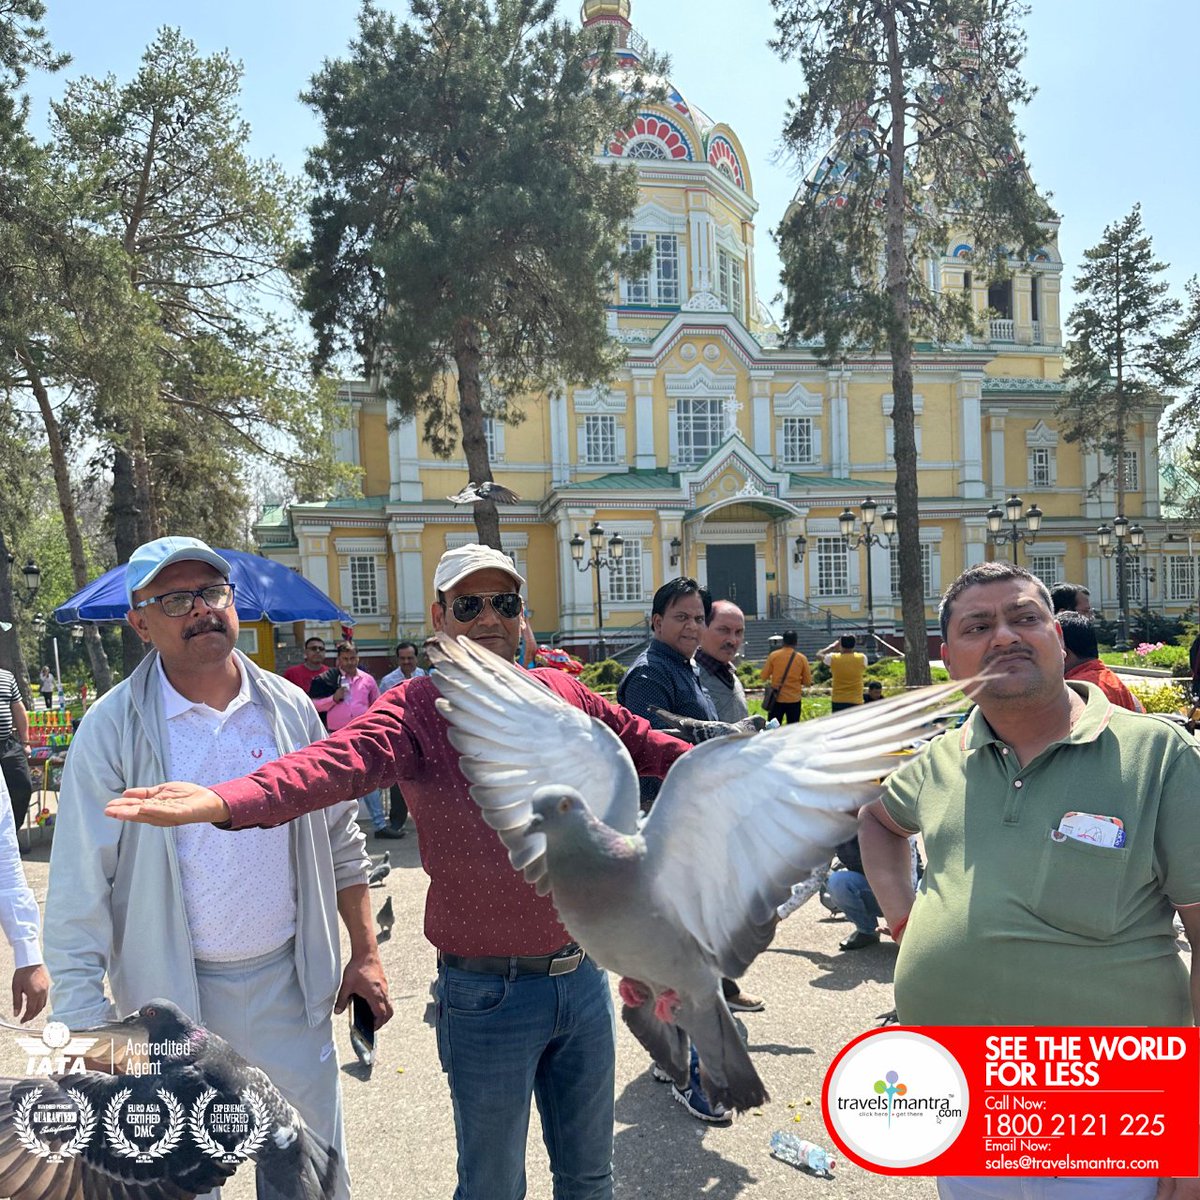 Recently, our new tour group explored the beauty of 28 Panfilov Guardsmen Park and Ascension Cathedral. 

🔴Enquire: bit.ly/AlmatyTourPack…
📱Call: 1800-2121-225

#TravelsMantraHolidays #AlmatyTours #TravelExperience #Wanderlust #ExploreTheWorld #TravelGoals #TravelAdventures